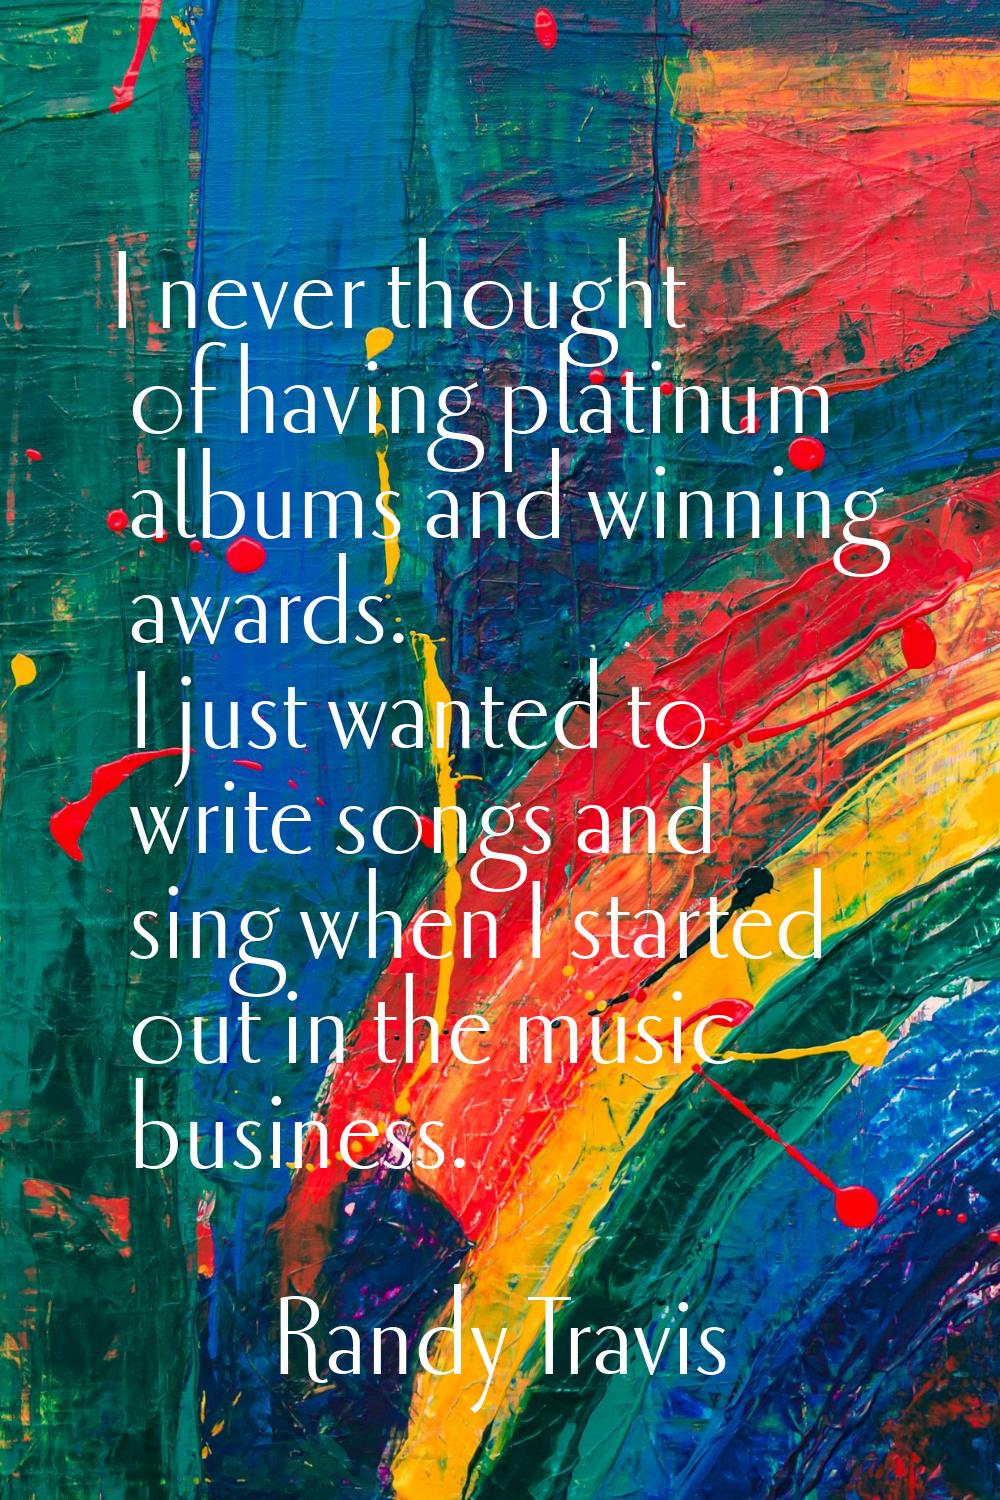 I never thought of having platinum albums and winning awards. I just wanted to write songs and sing